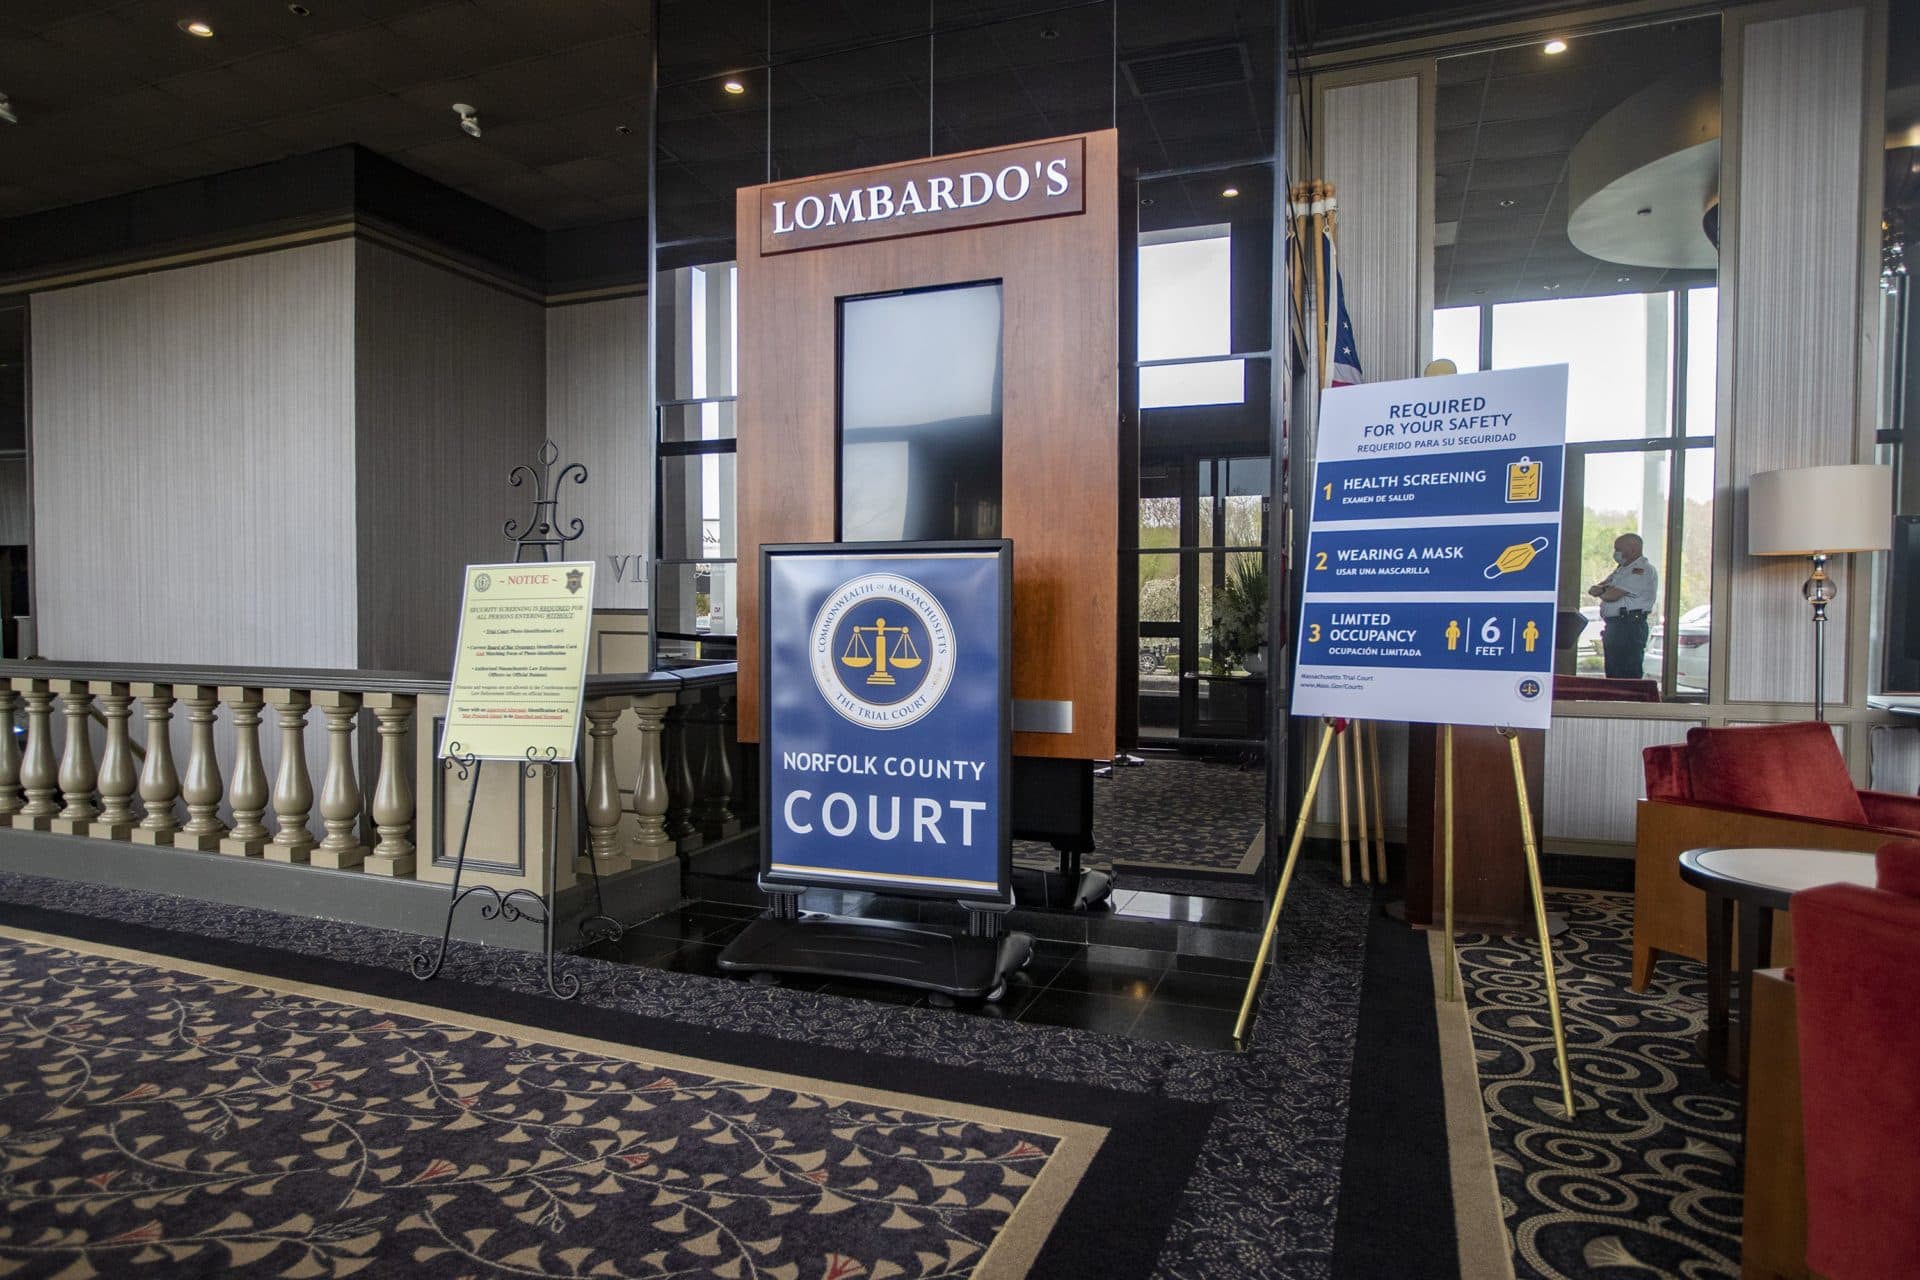 Signs for the Norfolk County Court in the entrance of Lombardo’s in Randolph. (Jesse Costa/WBUR)